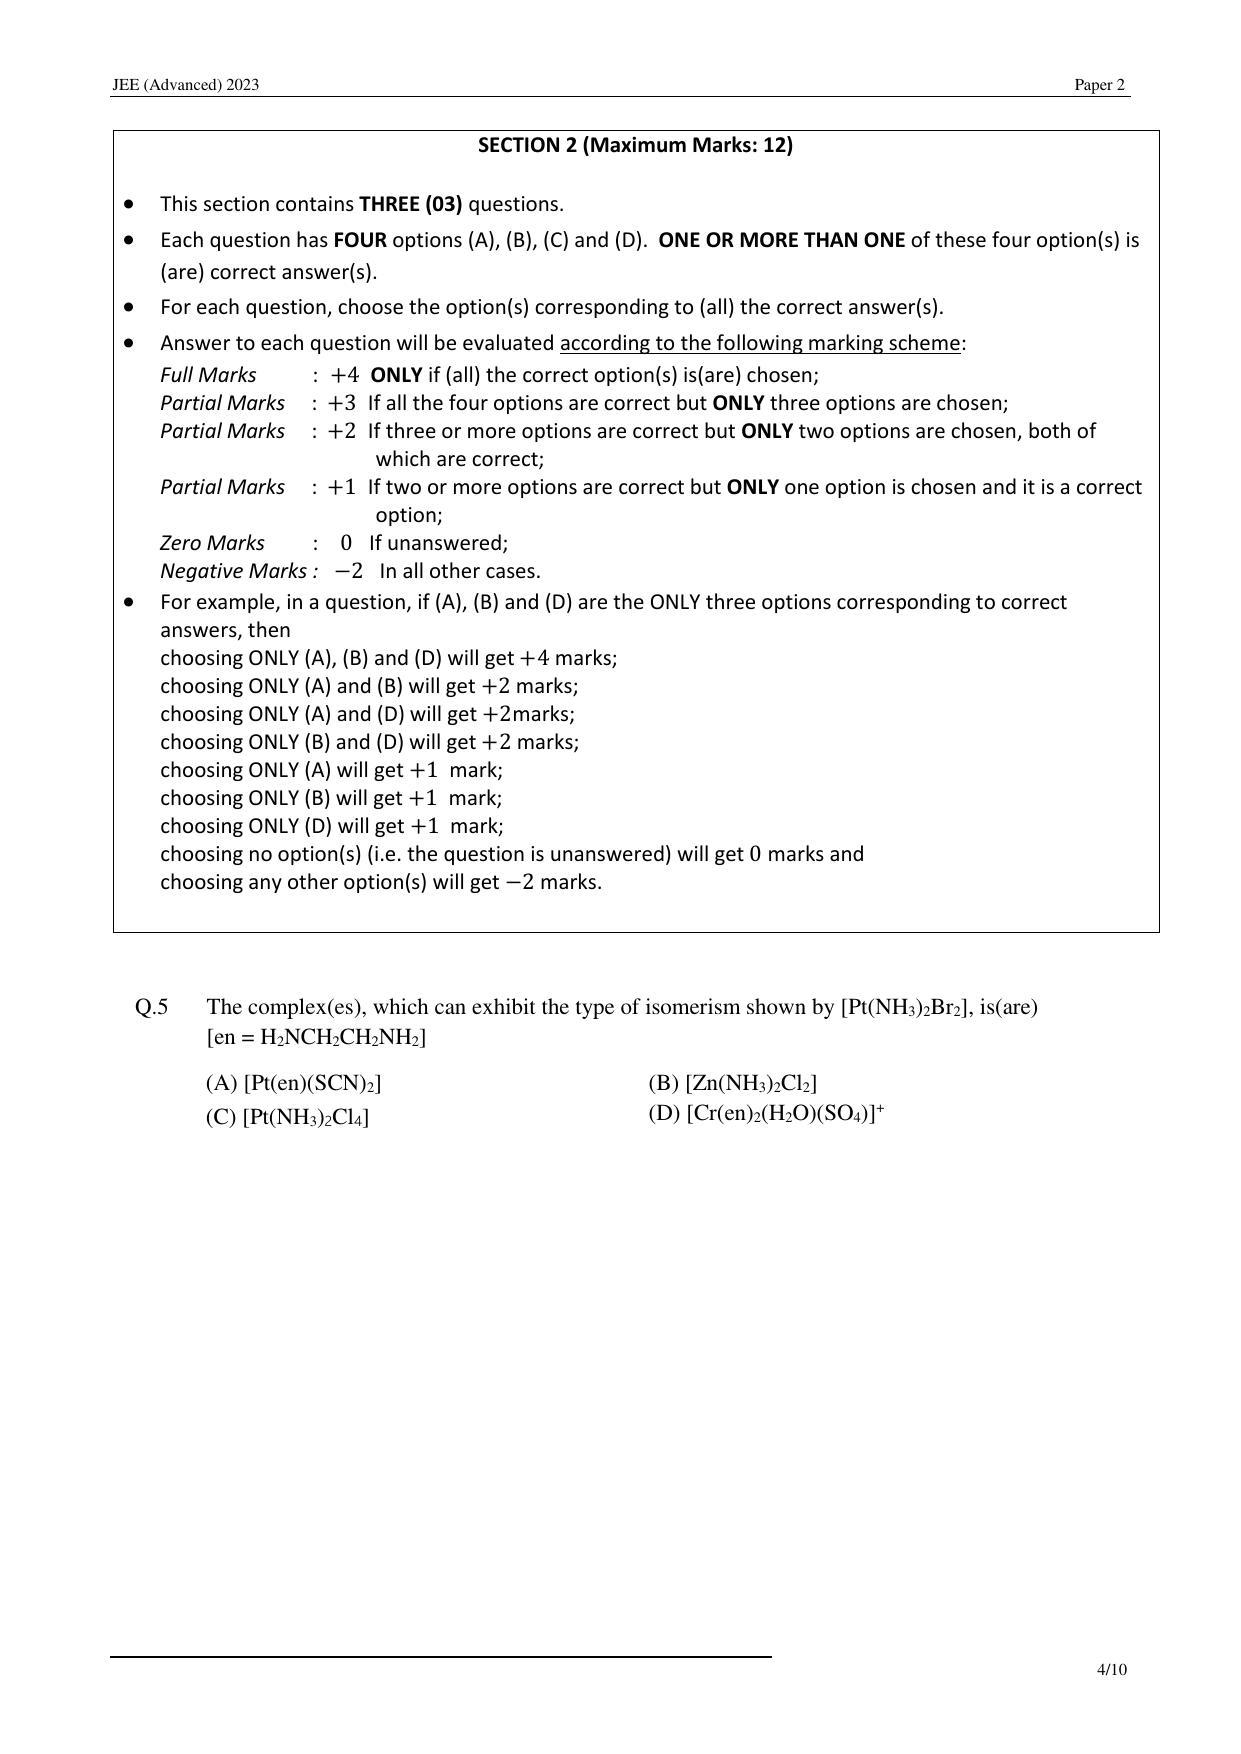 JEE (Advanced) 2023 Paper II - Mathematics Question Paper - Page 25